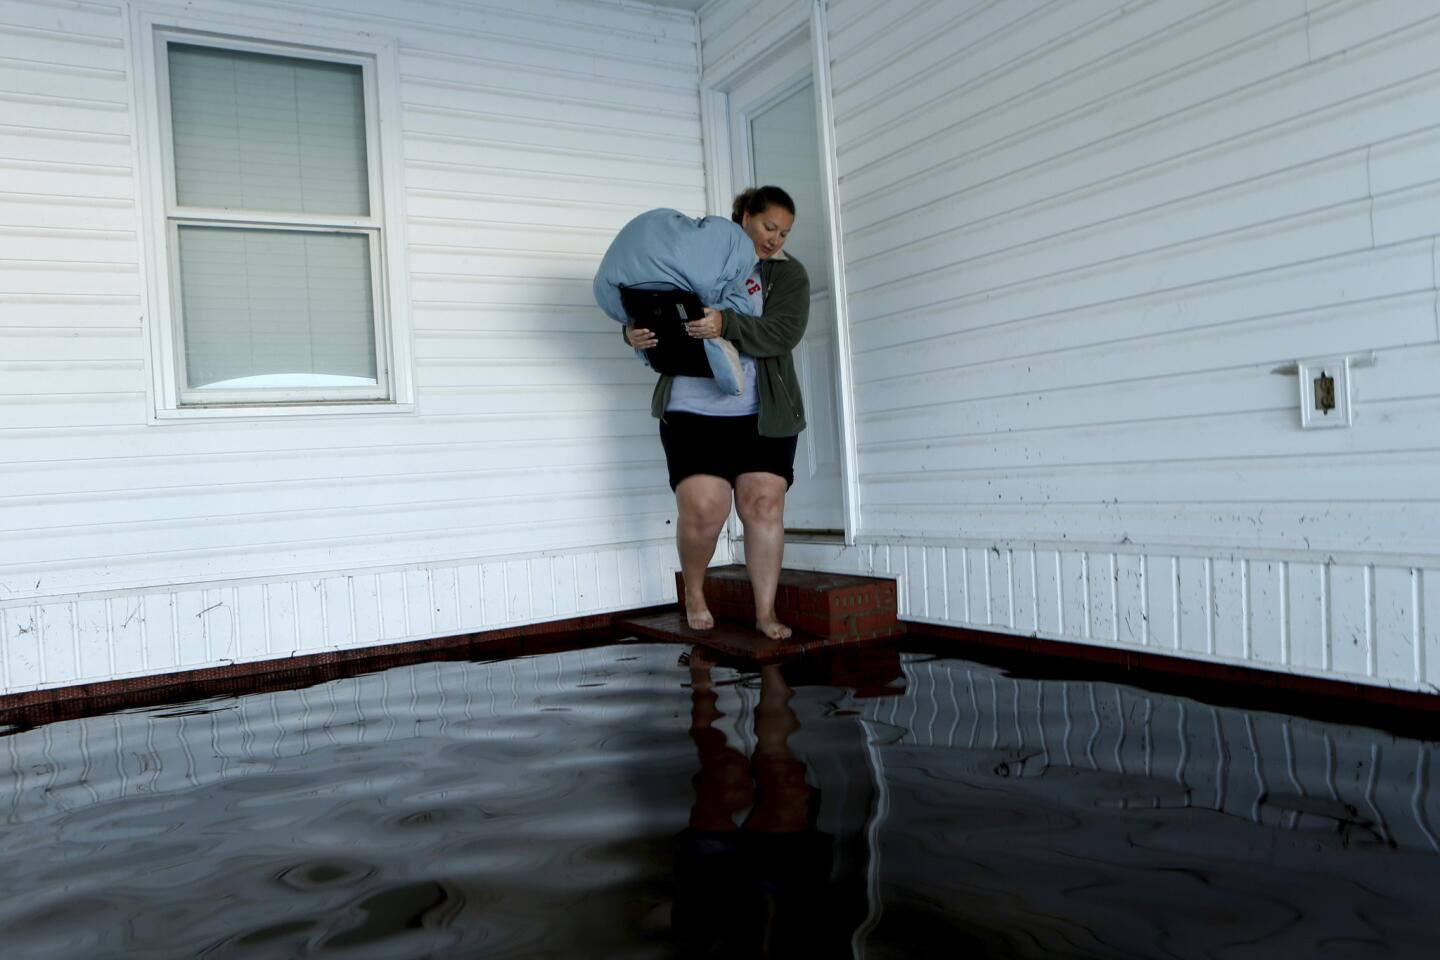 With her home surrounded by floodwaters associated with Hurricane Matthew, Janet Meier prepares to step back into the water in her carport after retrieving a warm blanket and her laptop computer on Oct. 13, 2016 in Lumberton, N.C.